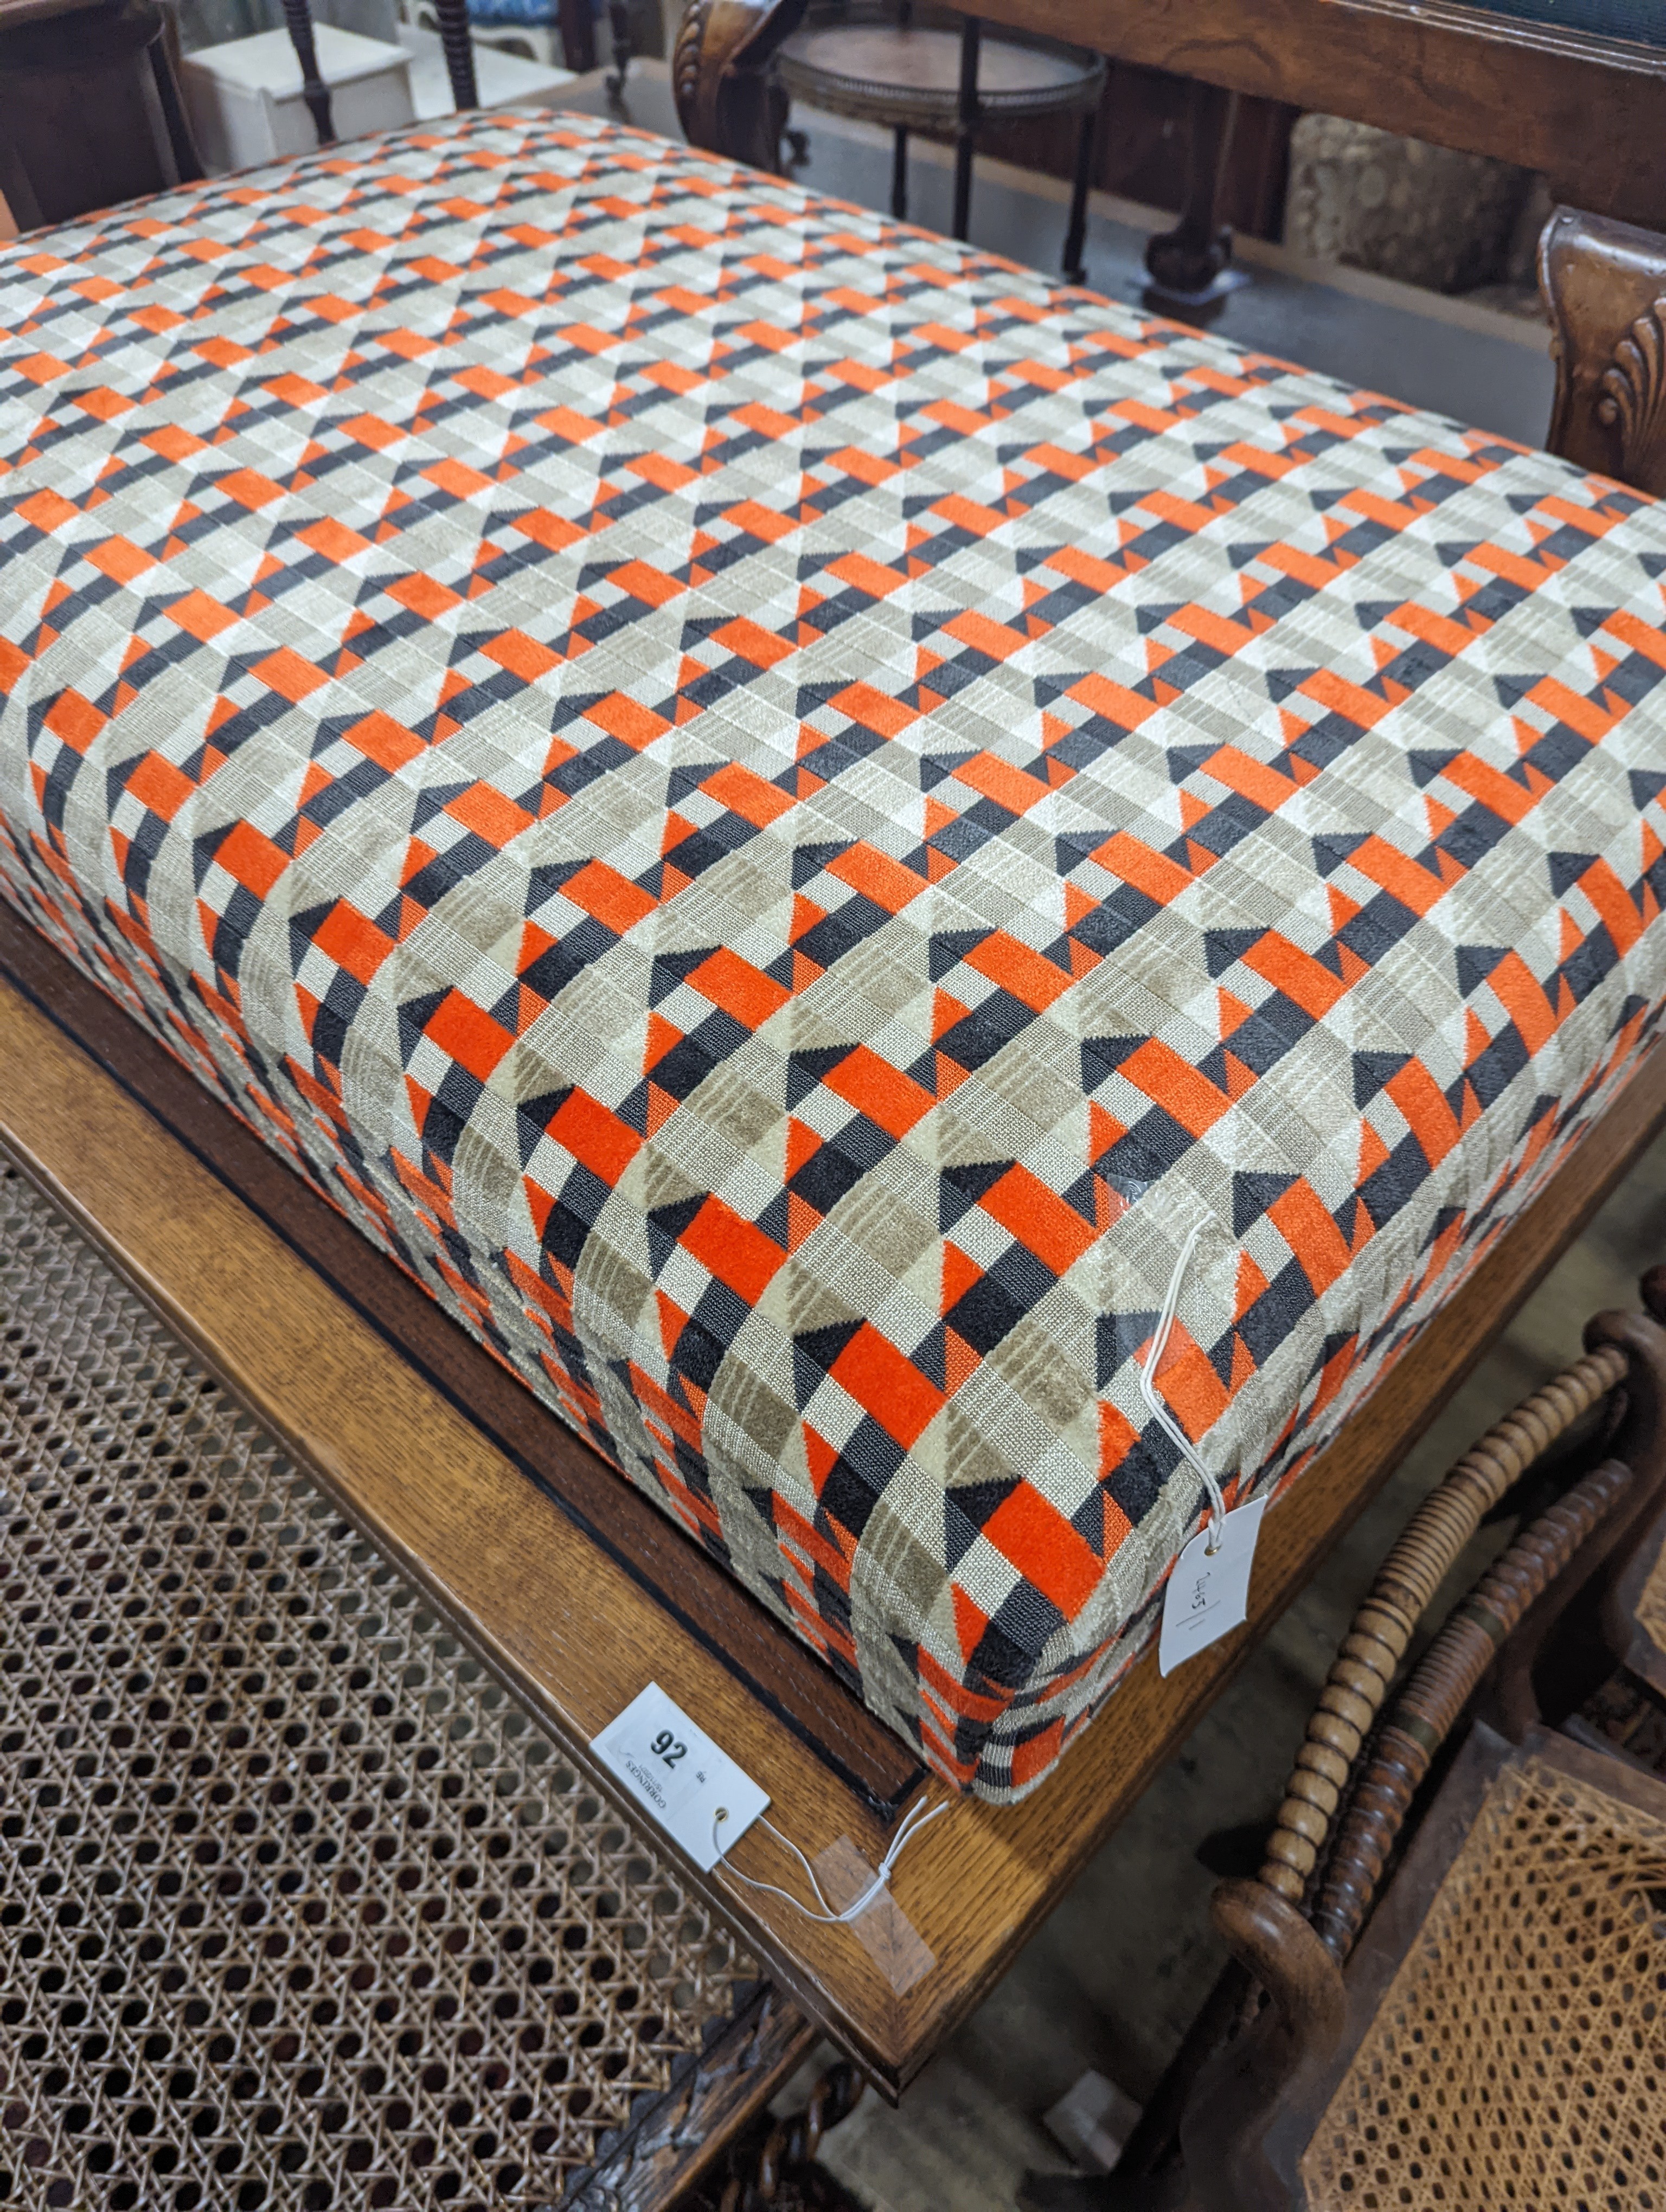 A contemporary rectangular footstool upholstered in Romo 